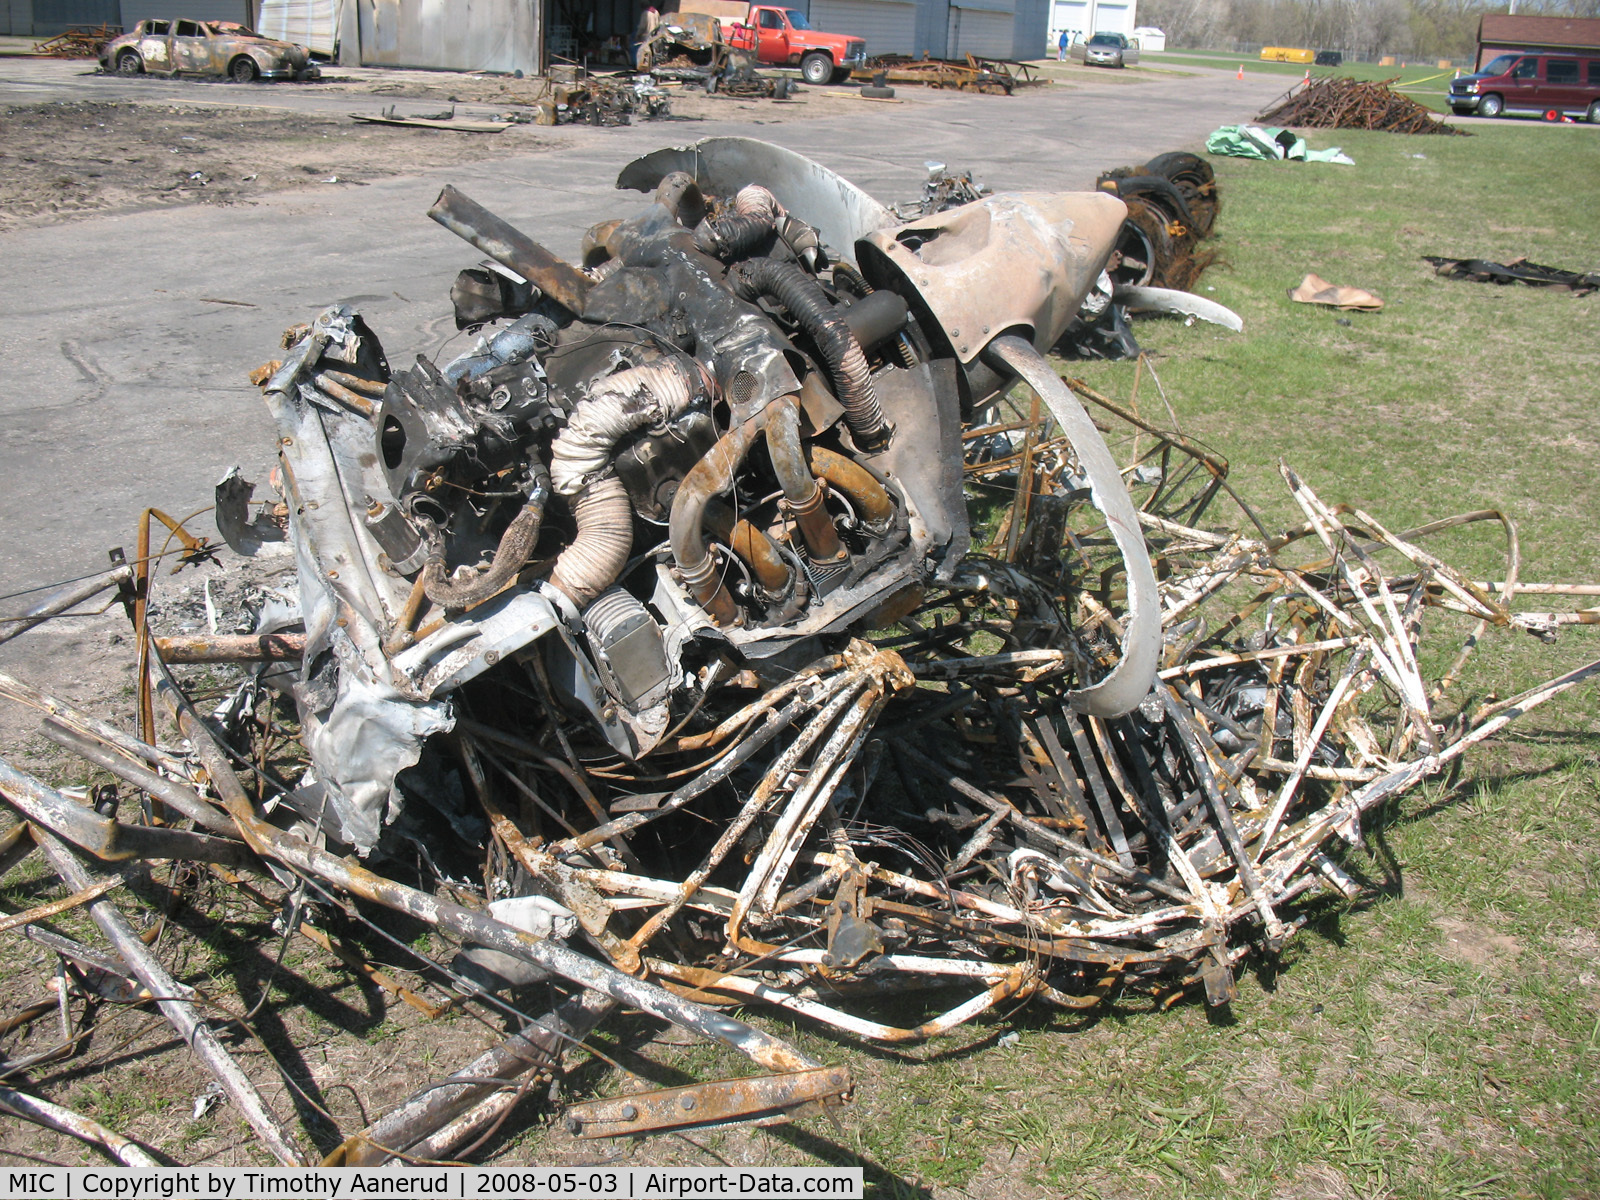 Crystal Airport (MIC) - The remains of a taildragger after the hangar fire on 27 April 2008